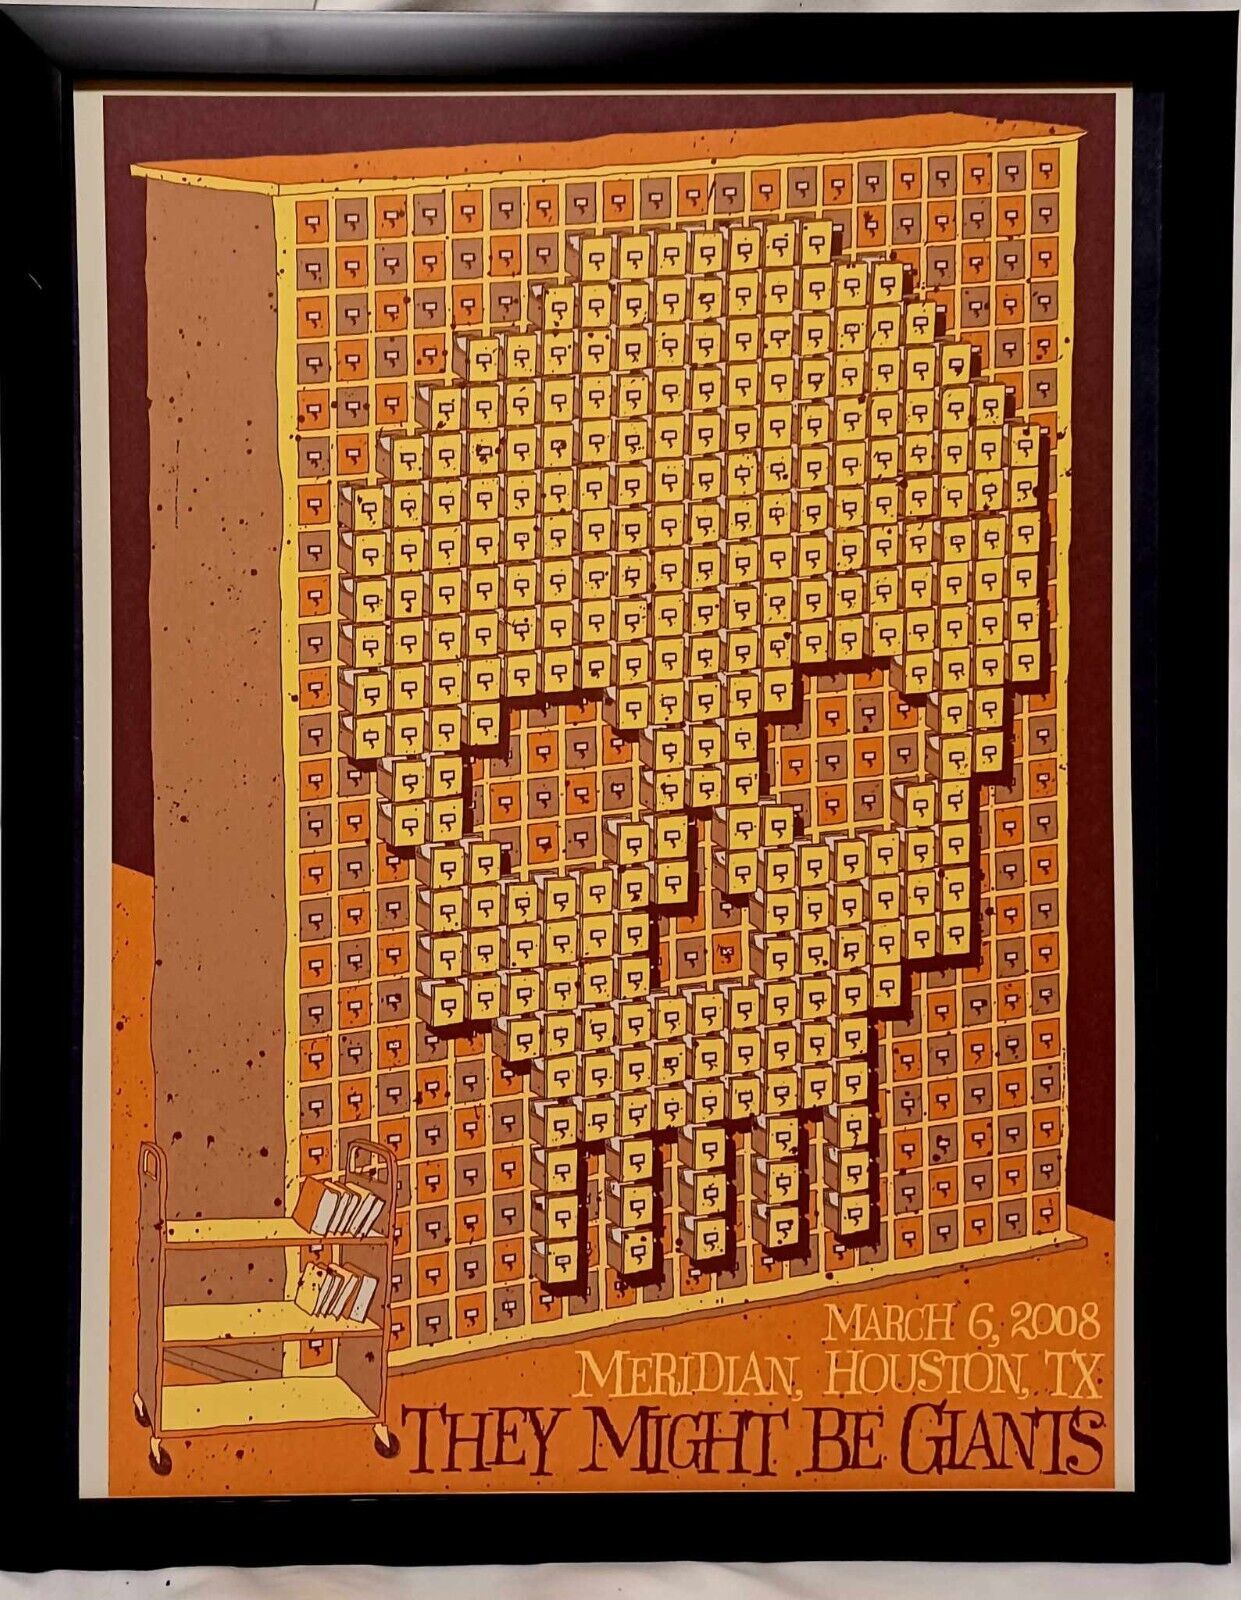 THEY MIGHT BE GIANTS 2008 Houston 11x14 FRAMED Vintage Concert Poster Art Print